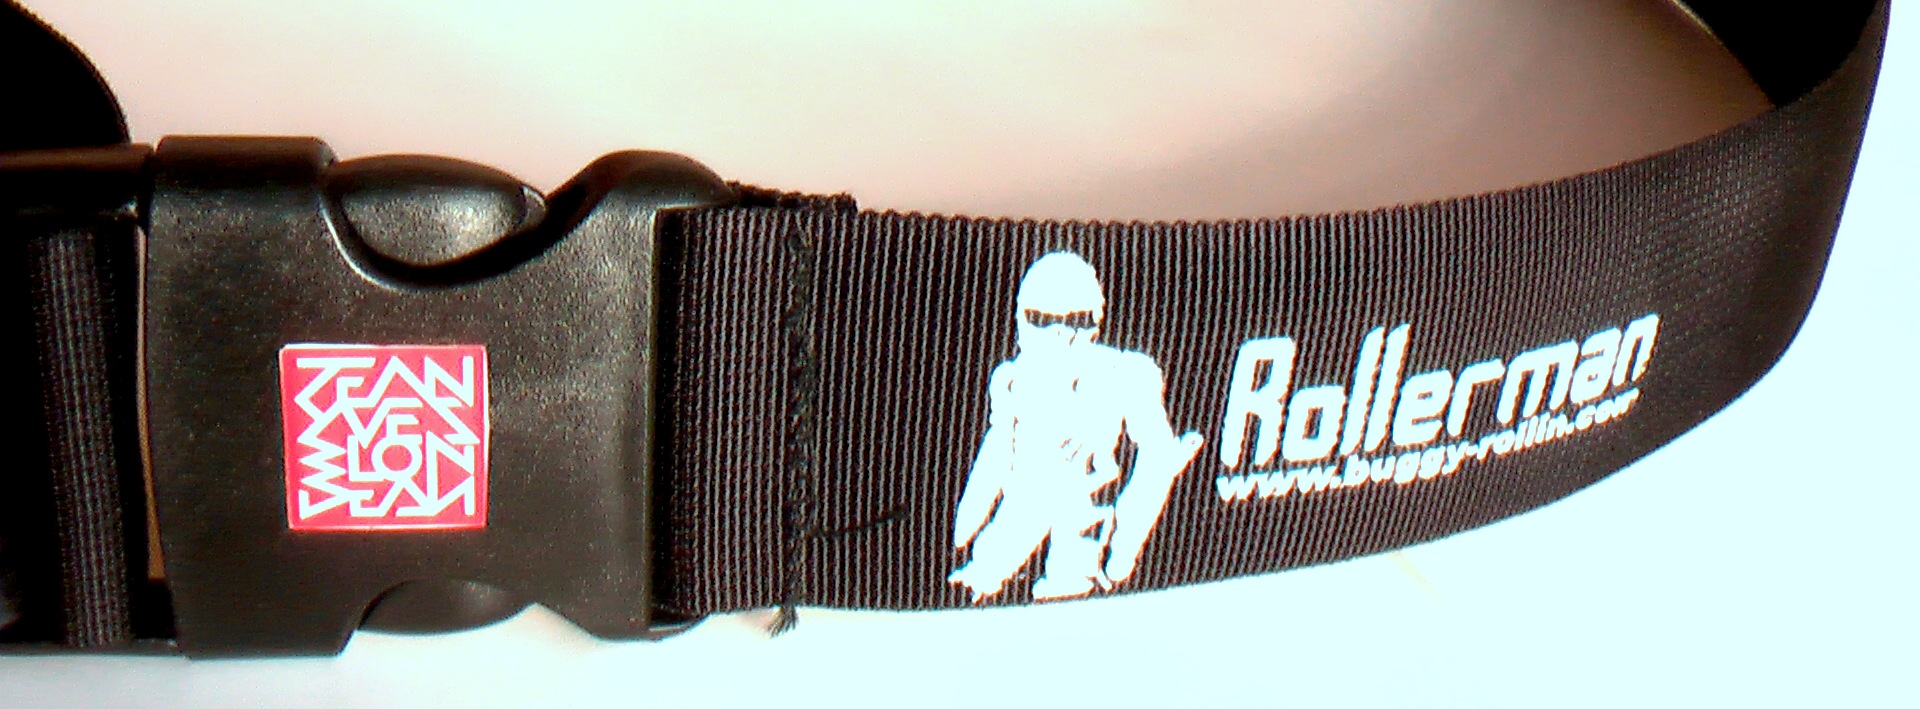 detail of the graphic design of rollerman printed on belt